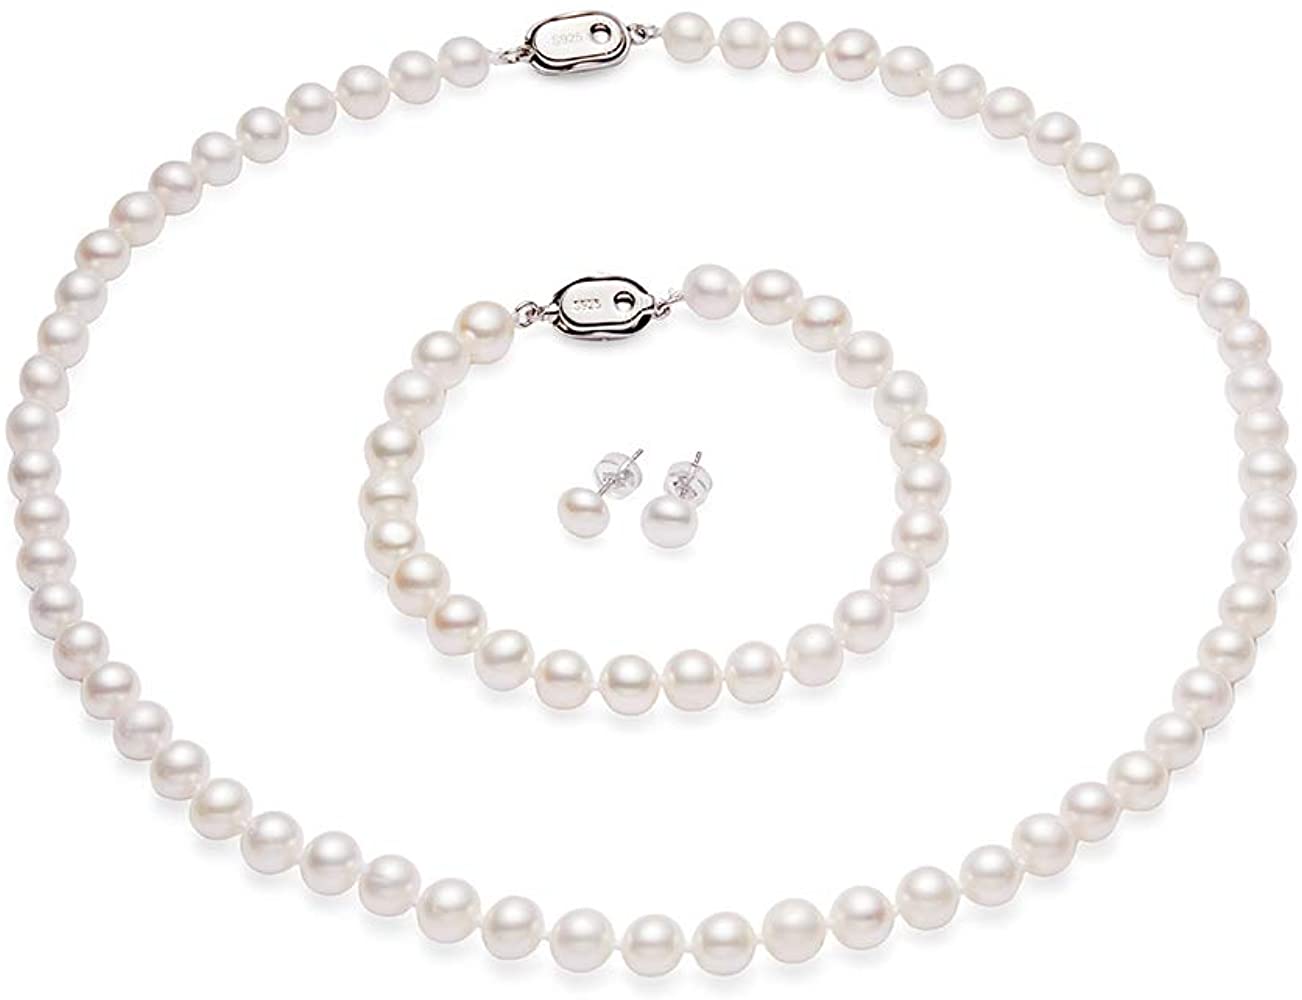 Best White Freshwater Cultured Pearl Necklace Set Includes atractive Bracelet and Stud Earrings Jewelry for every Women and Girls